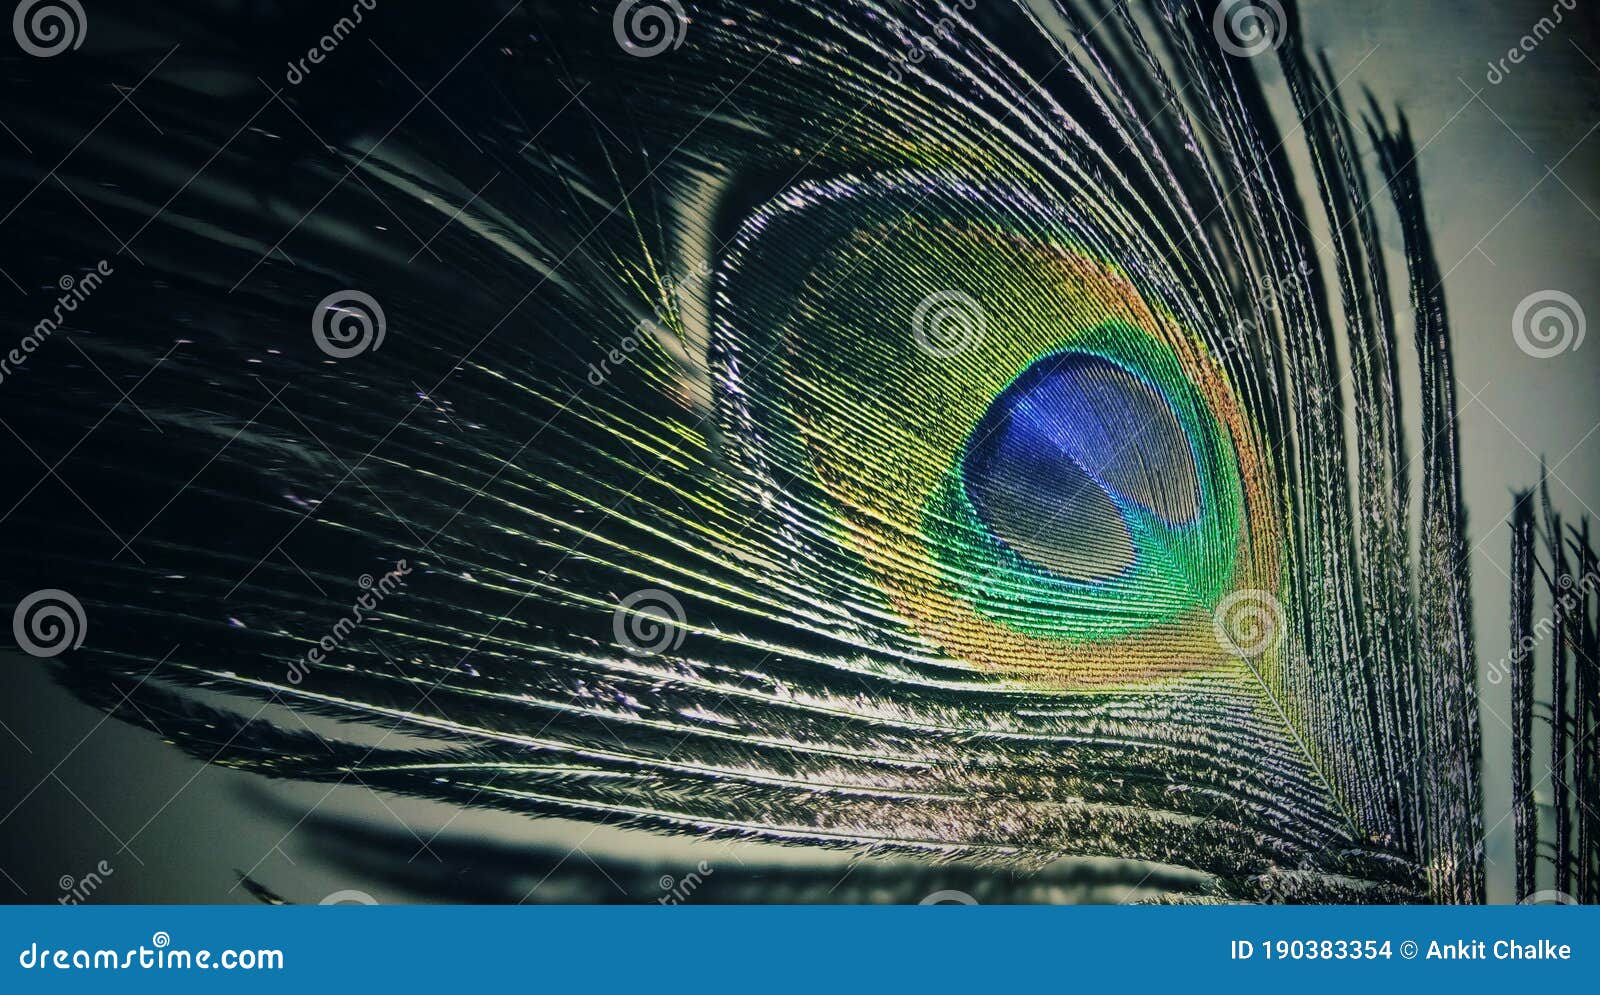 Peacock feather, Mor pankh stock photo. Image of beuty - 190383354